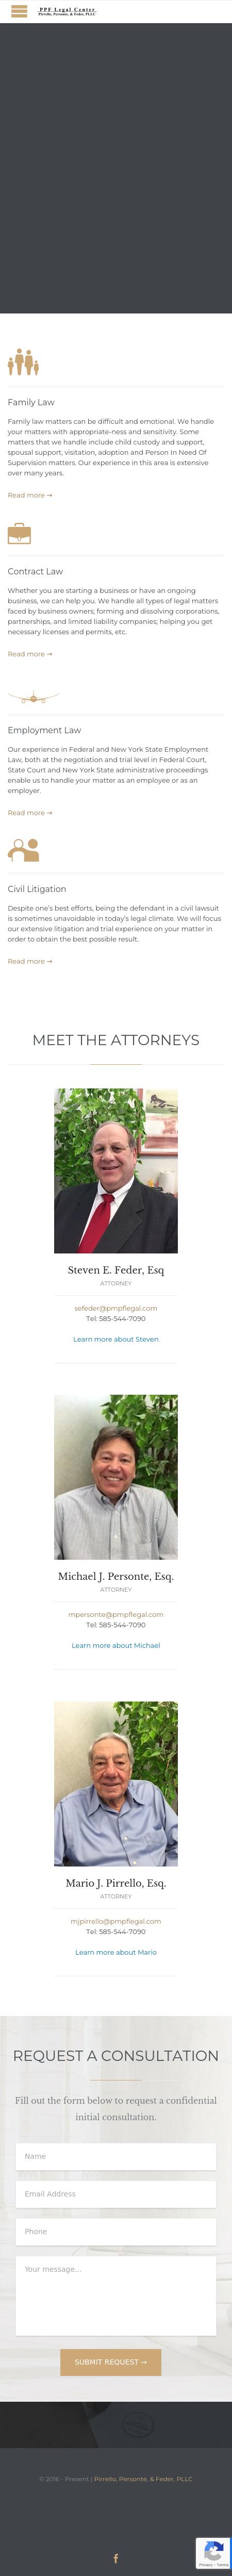 Pirrello Personte & Feder - Rochester NY Lawyers